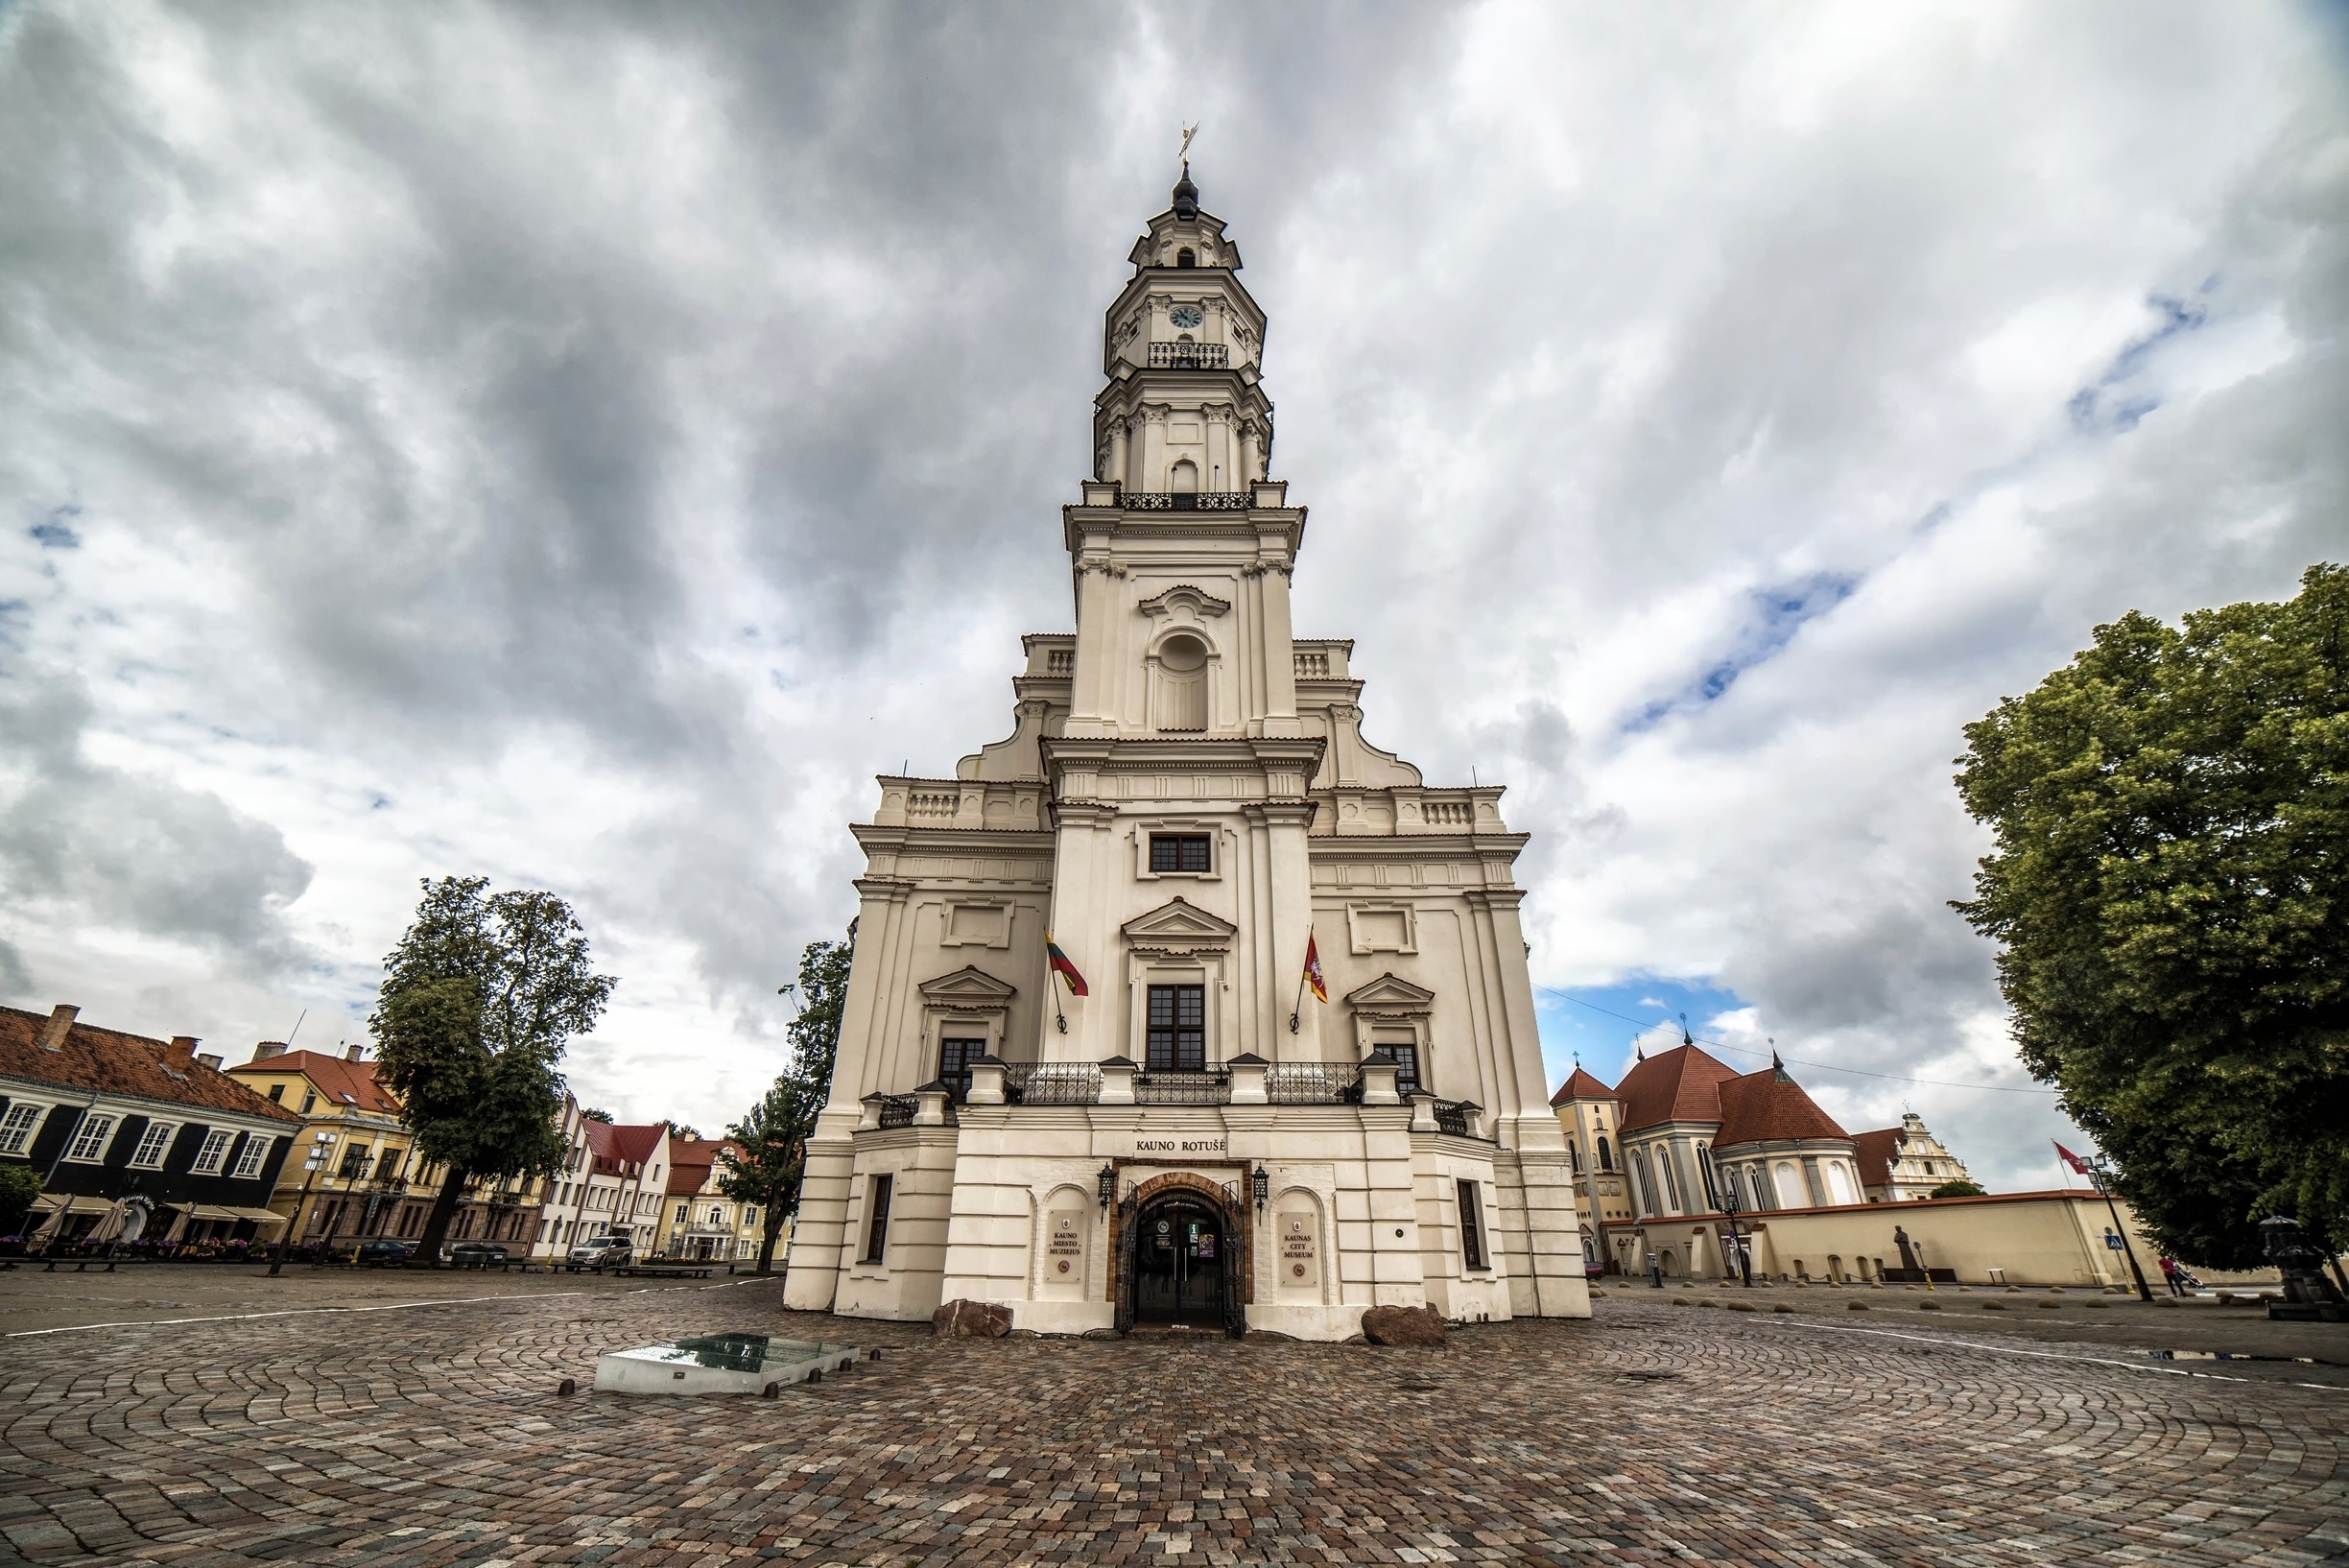 Kaunas town hall in the middle of the old town